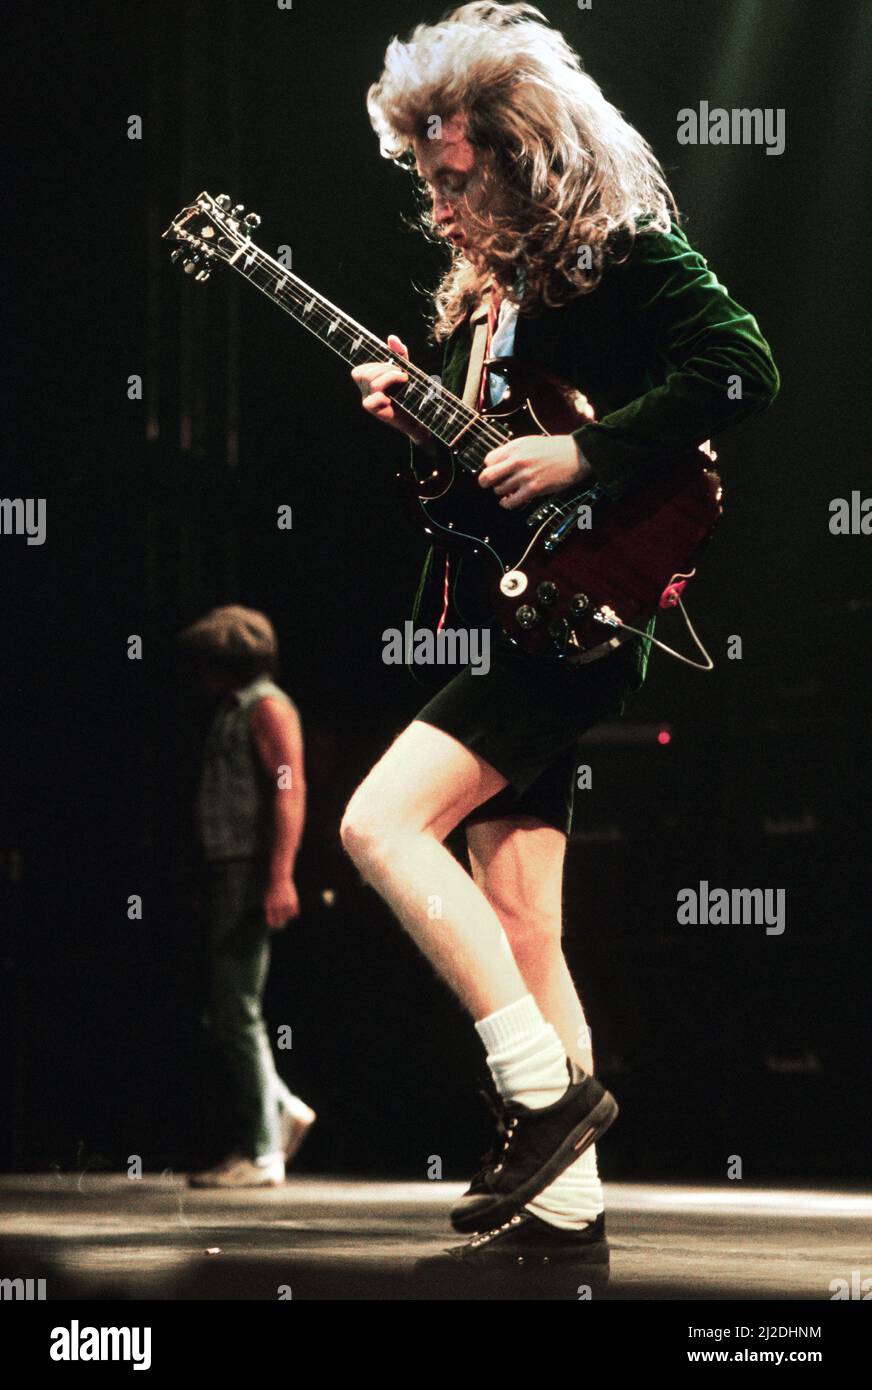 Australian rock group AC/DC performing on stage at Wembley Arena  during their 'Fly On The Wall ' World tour.  Pictured is guitarist Angus Young. 16th January 1986. Stock Photo